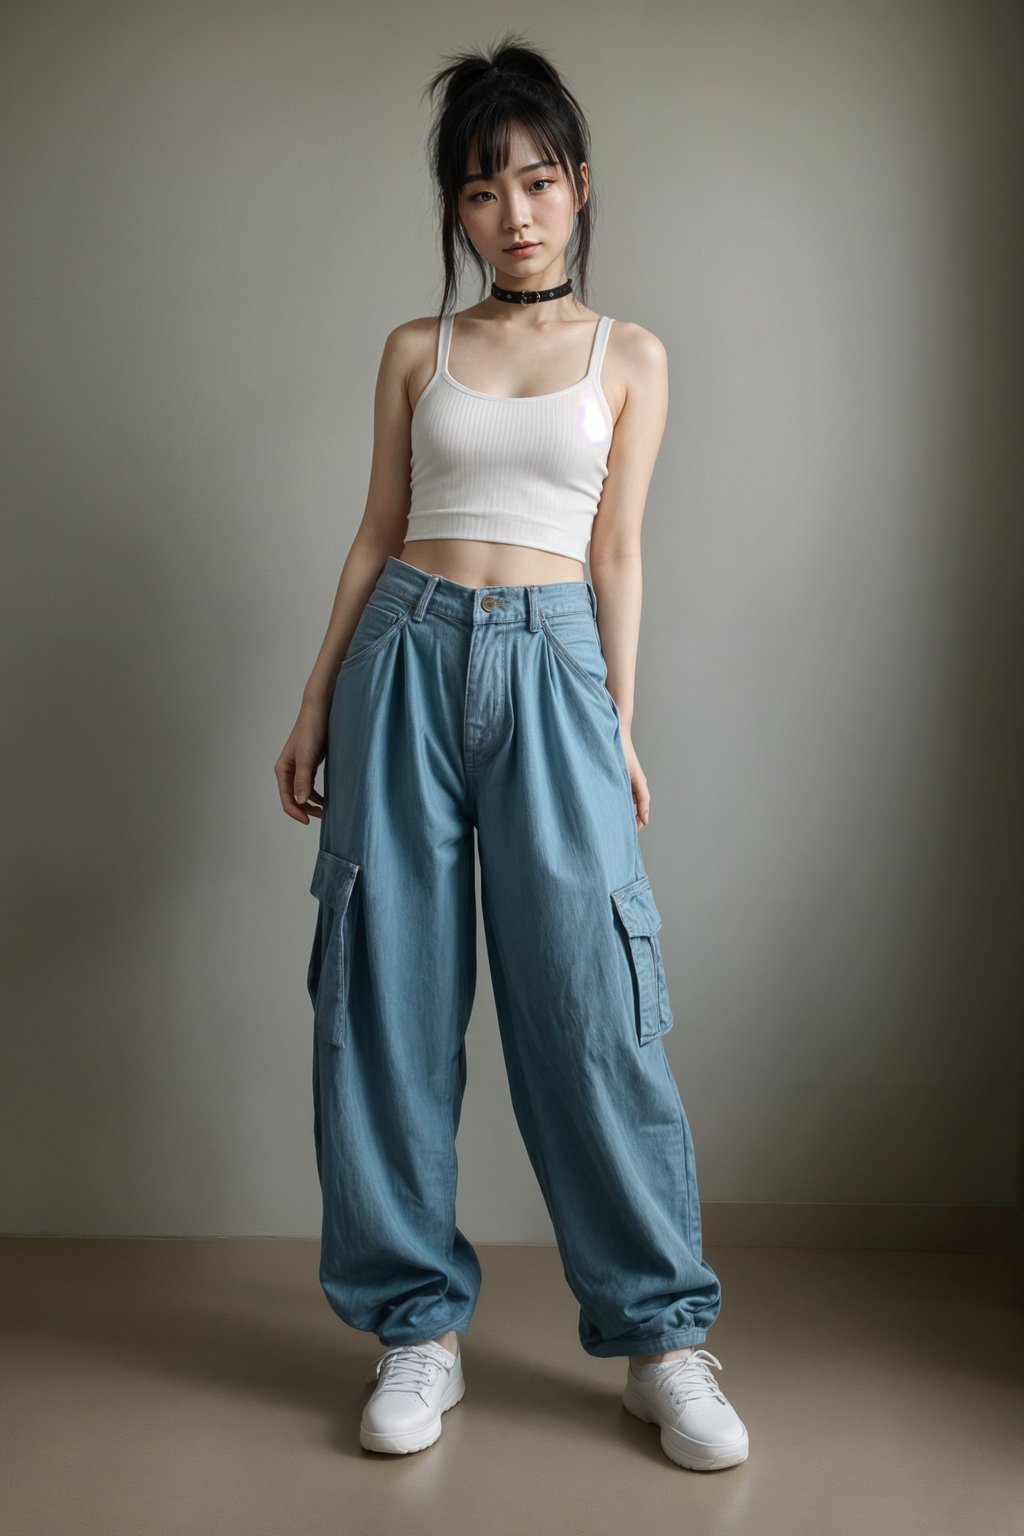 woman wearing Y2K aesthetic, 2000s fashion, aughts style, noughties style, grunge or 2000s style, oversized washed out style, baggy pants, low rise pants or cargo pants, crop top, Choker, Metallic, iridescent fabrics, posing for photo